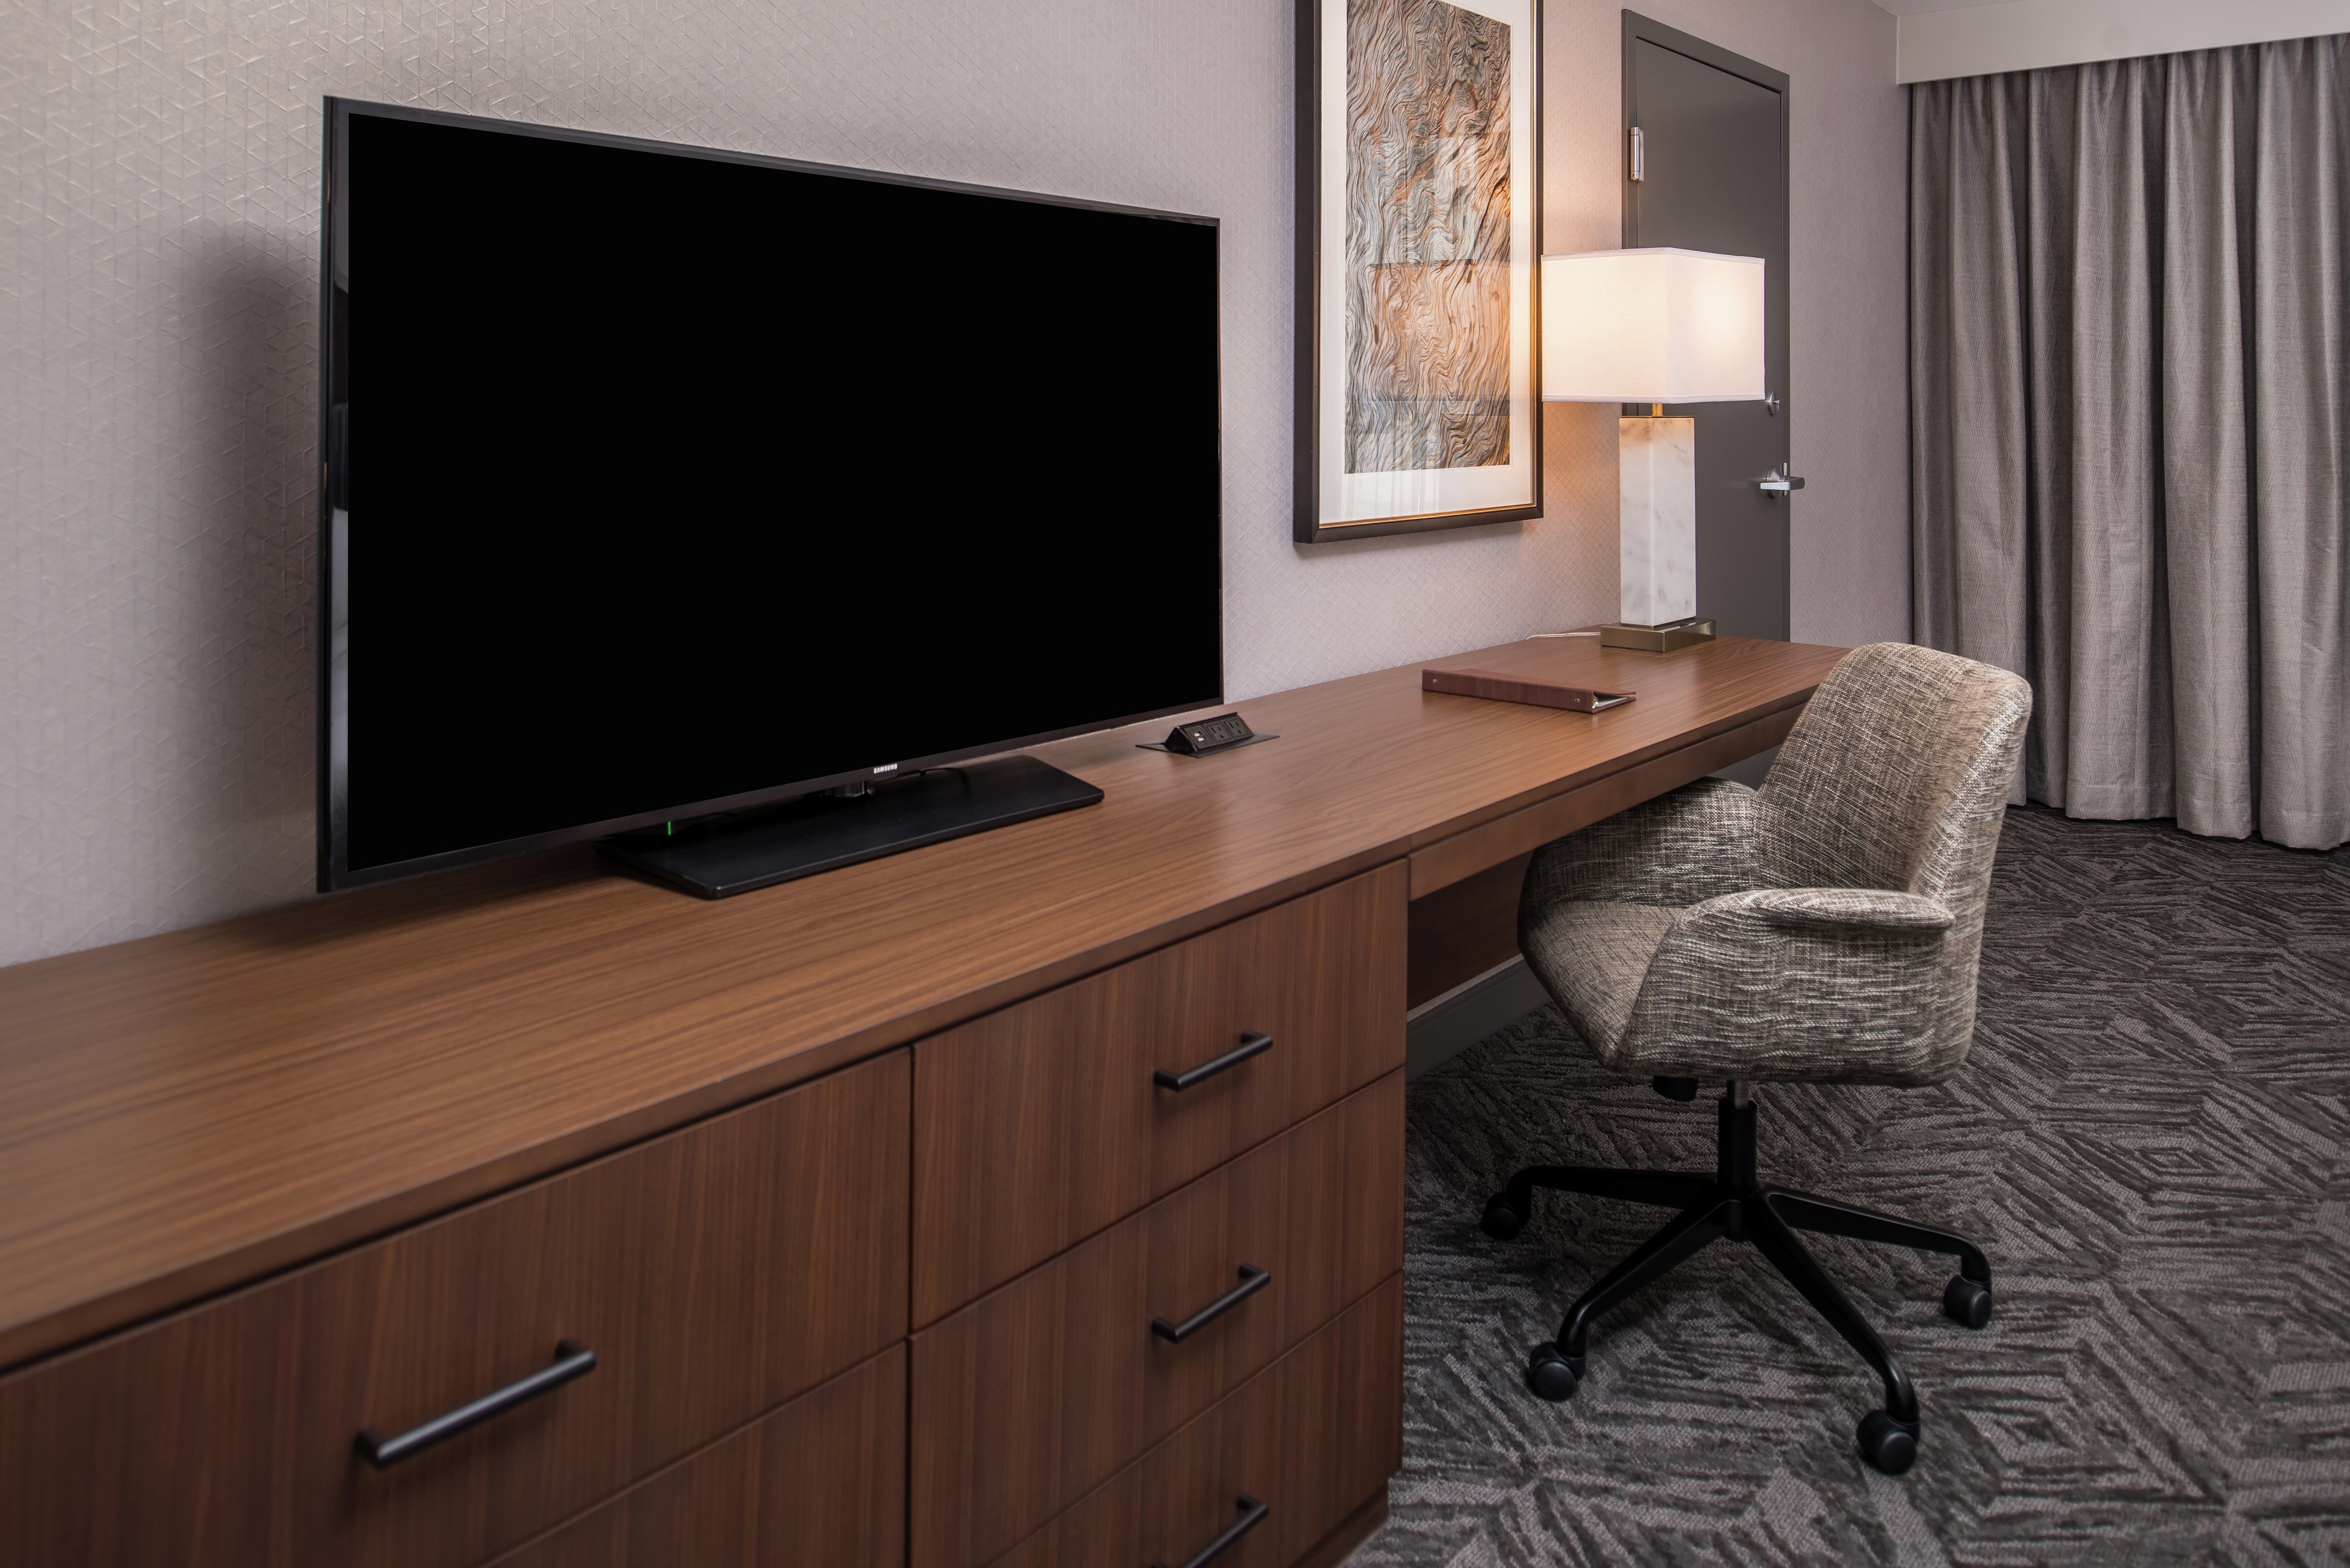 Guest Room With Flat Screen Television, Work Desk, and Chair